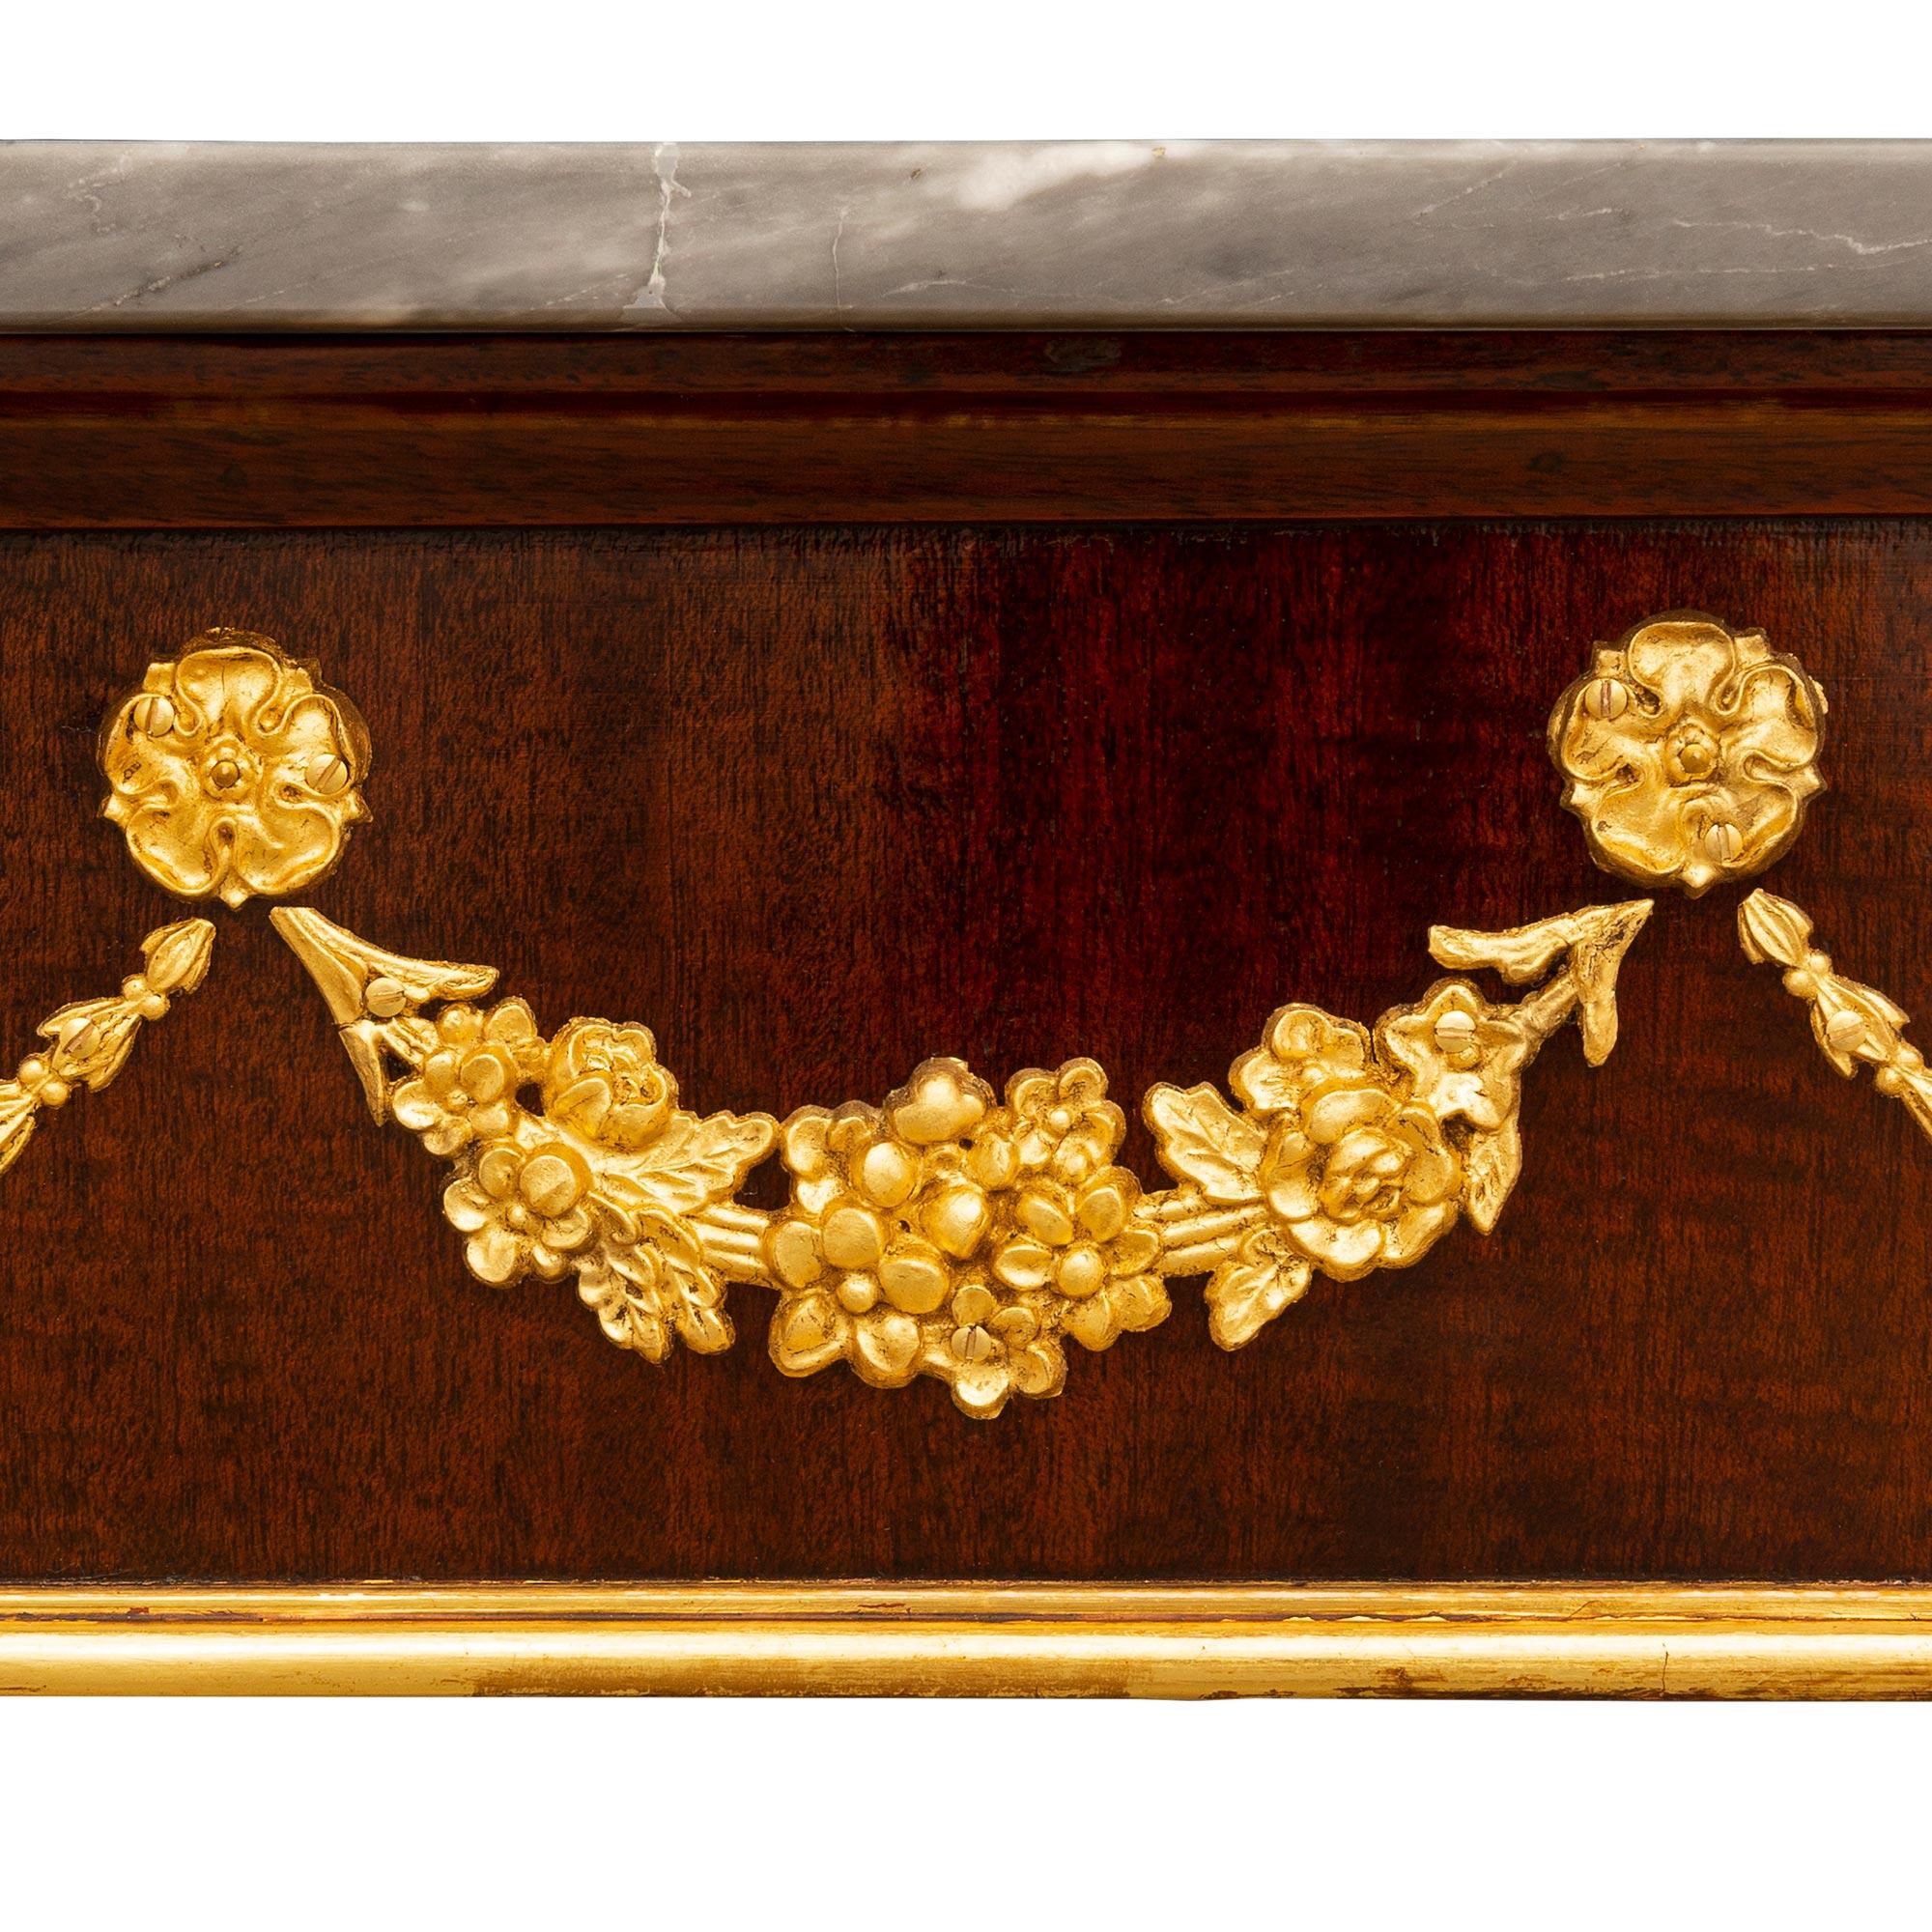 Italian 19th Century Louis XVI St. Mahogany, Giltwood, and Marble Console For Sale 4